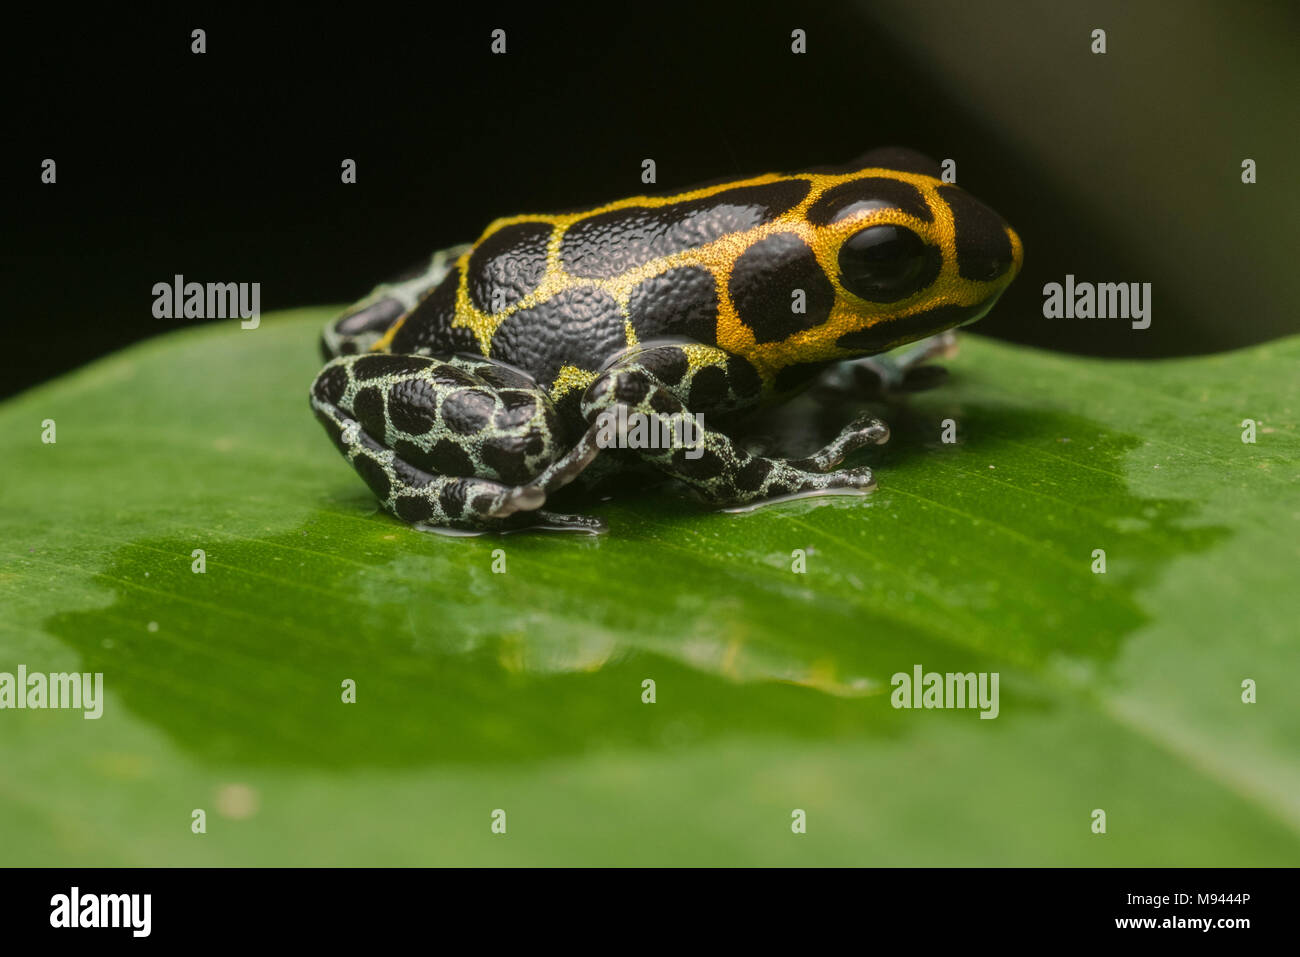 Mimic poison frog (Ranitomeya imitator) on a leaf at night, it is a mullerian mimic of R. variabilis. Both species are toxic & gain shared protection. Stock Photo